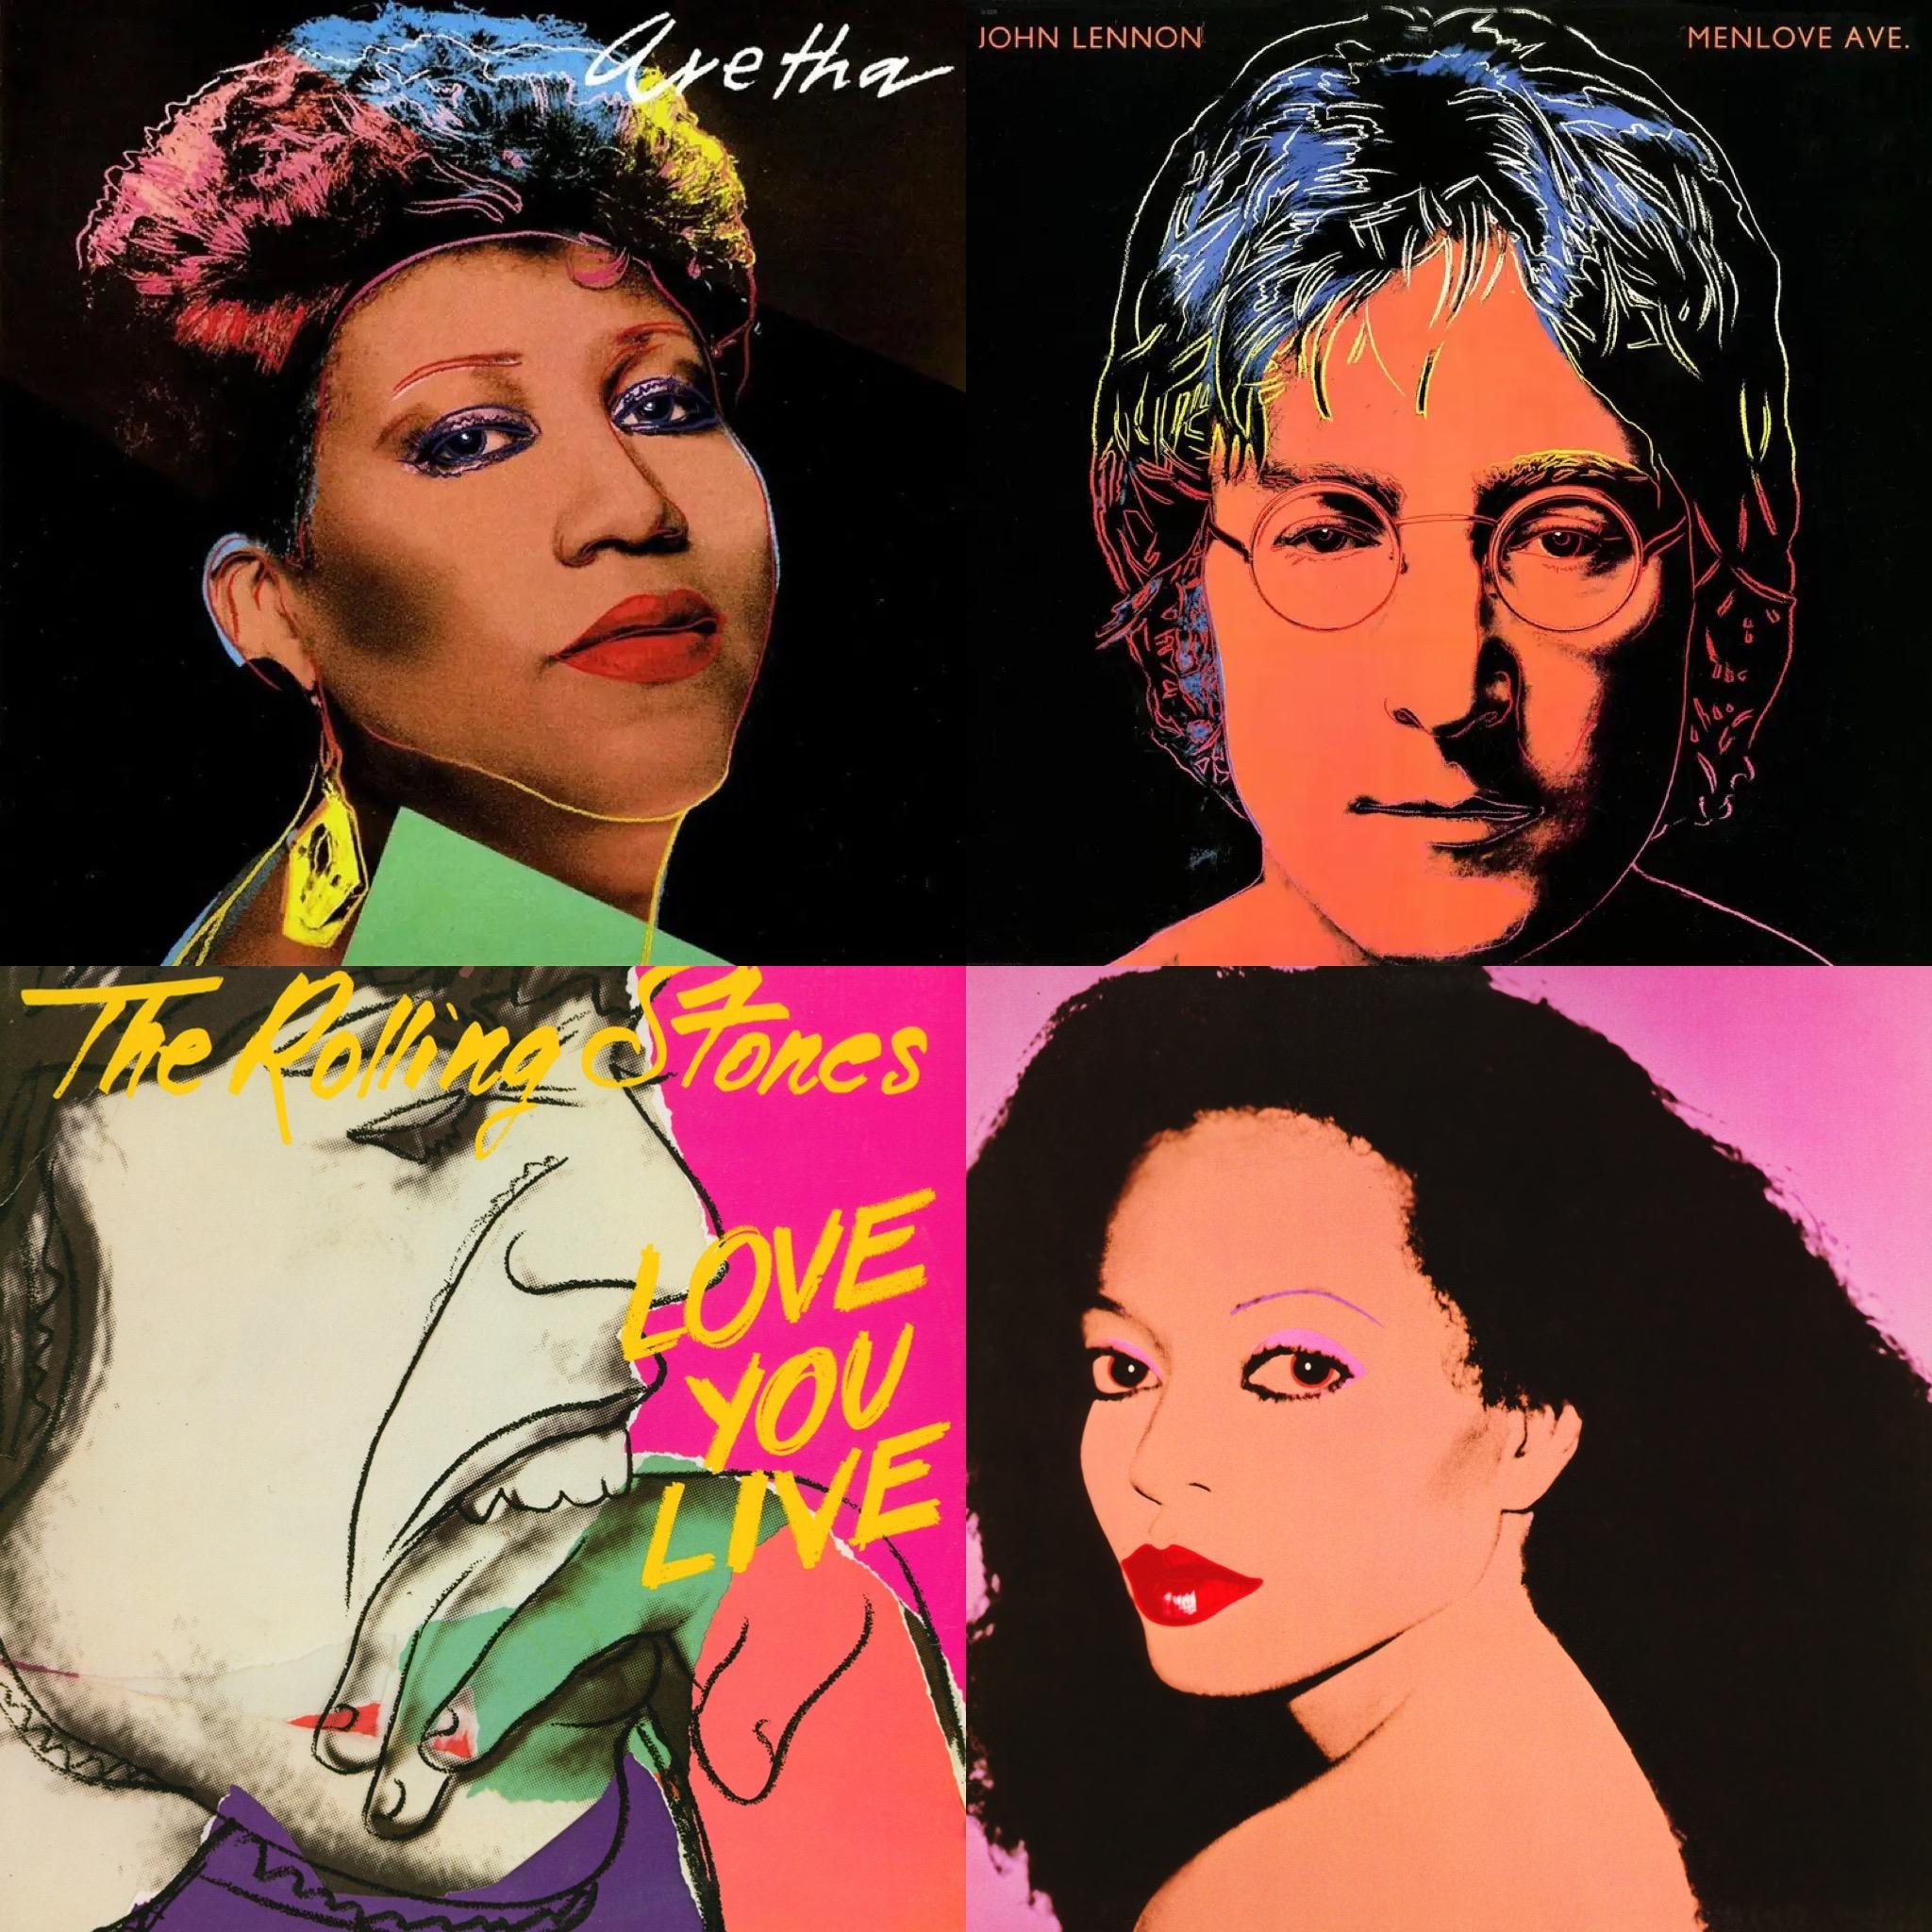 Andy Warhol Designed Record Covers (Set of 4 LPs)